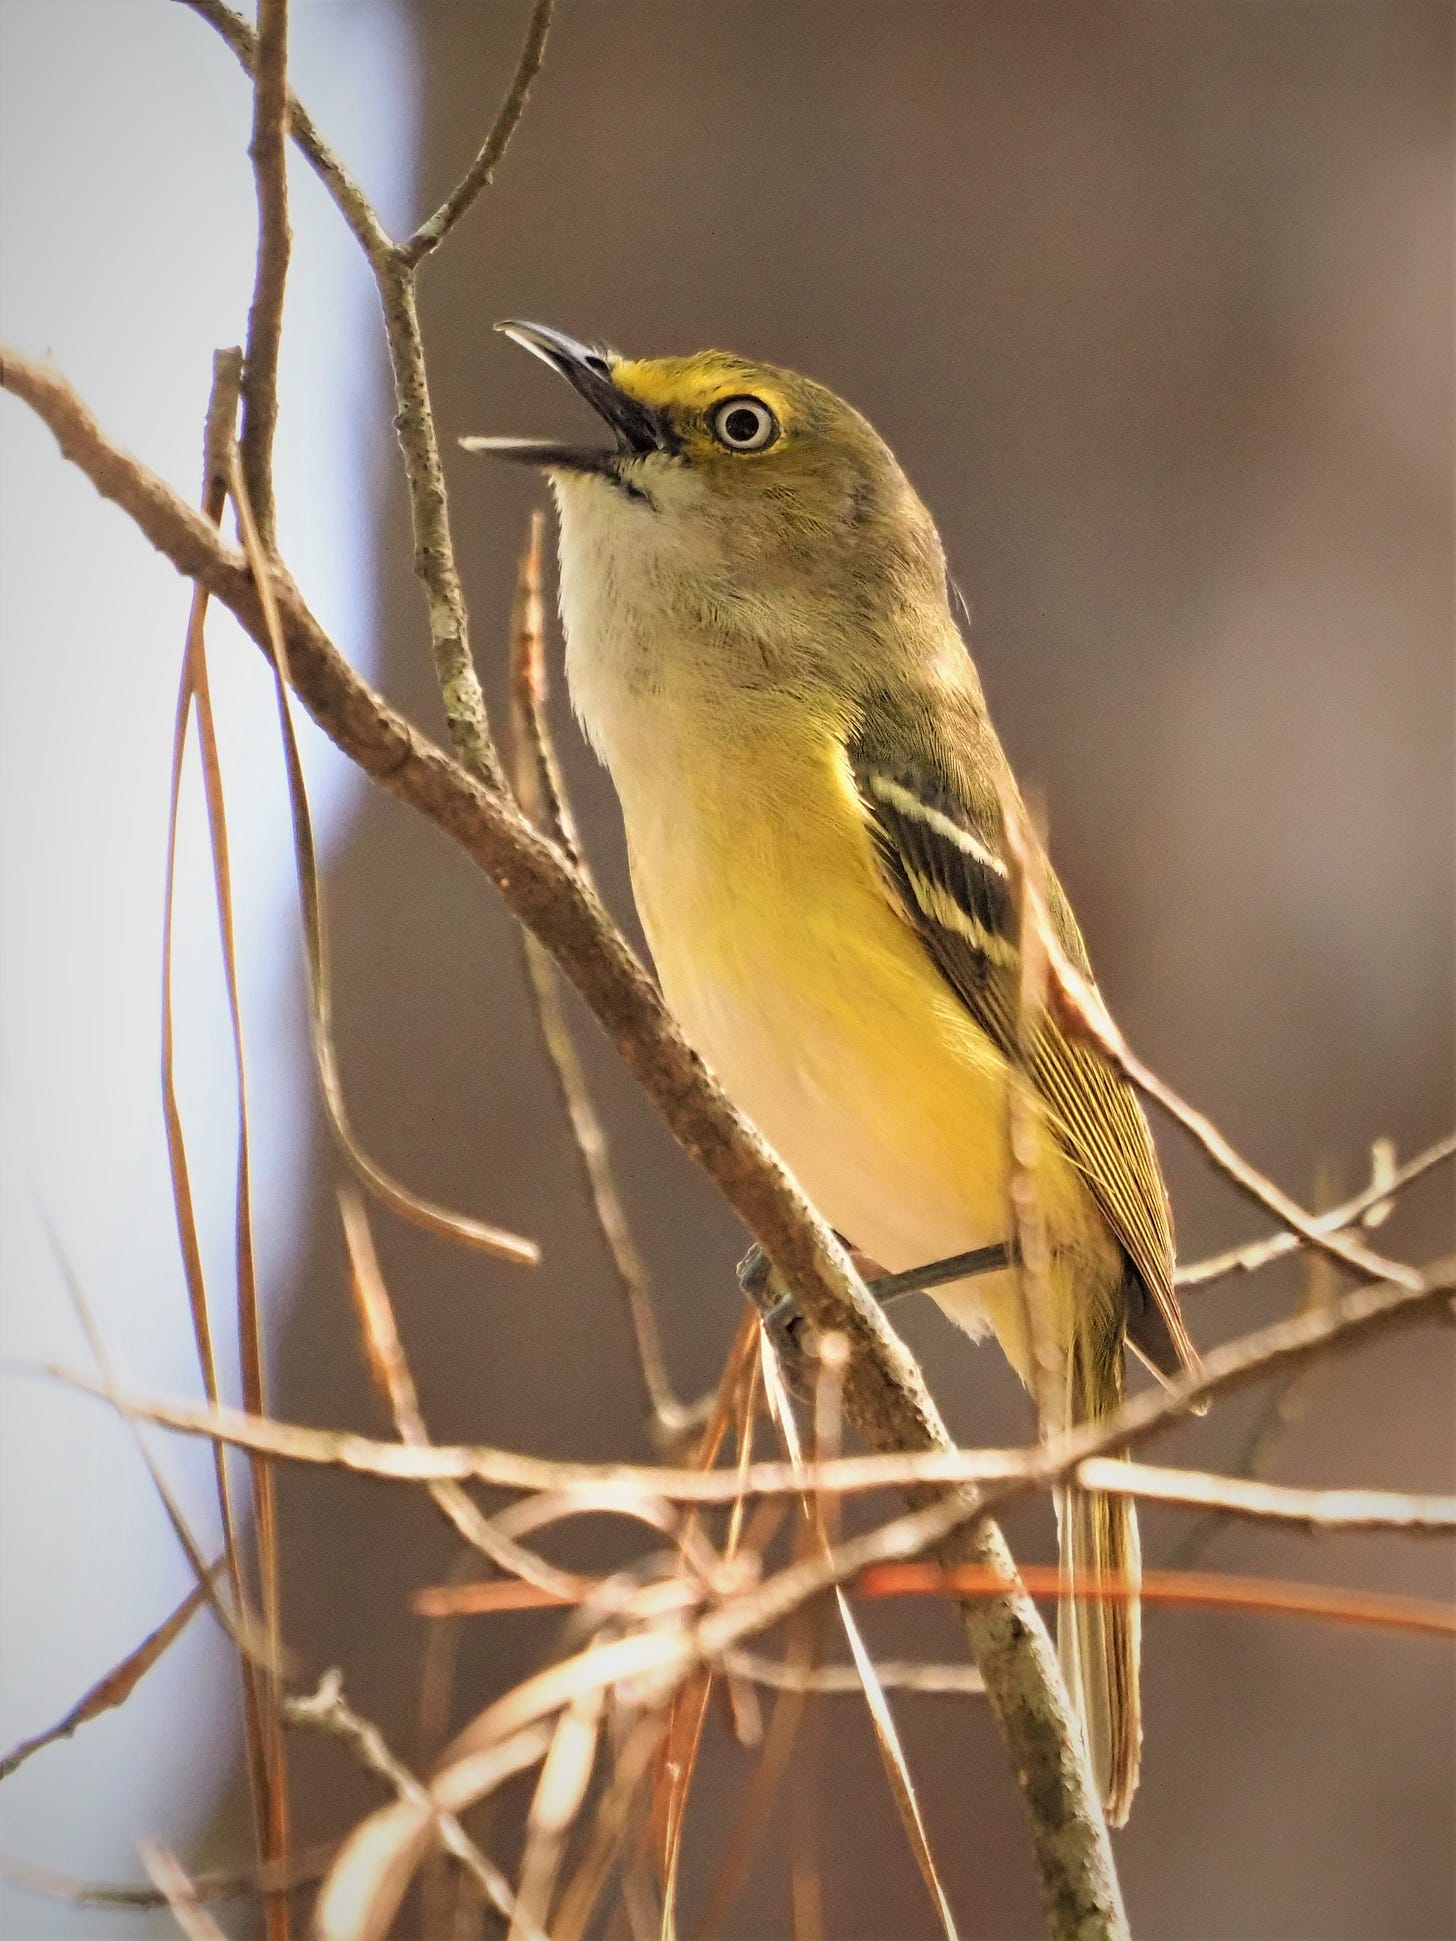 A small yellow and gray songbird sings from a bare branch, its black bill opened wide and tilted upward. It has white and black wing bars and a conspicuous white eye.